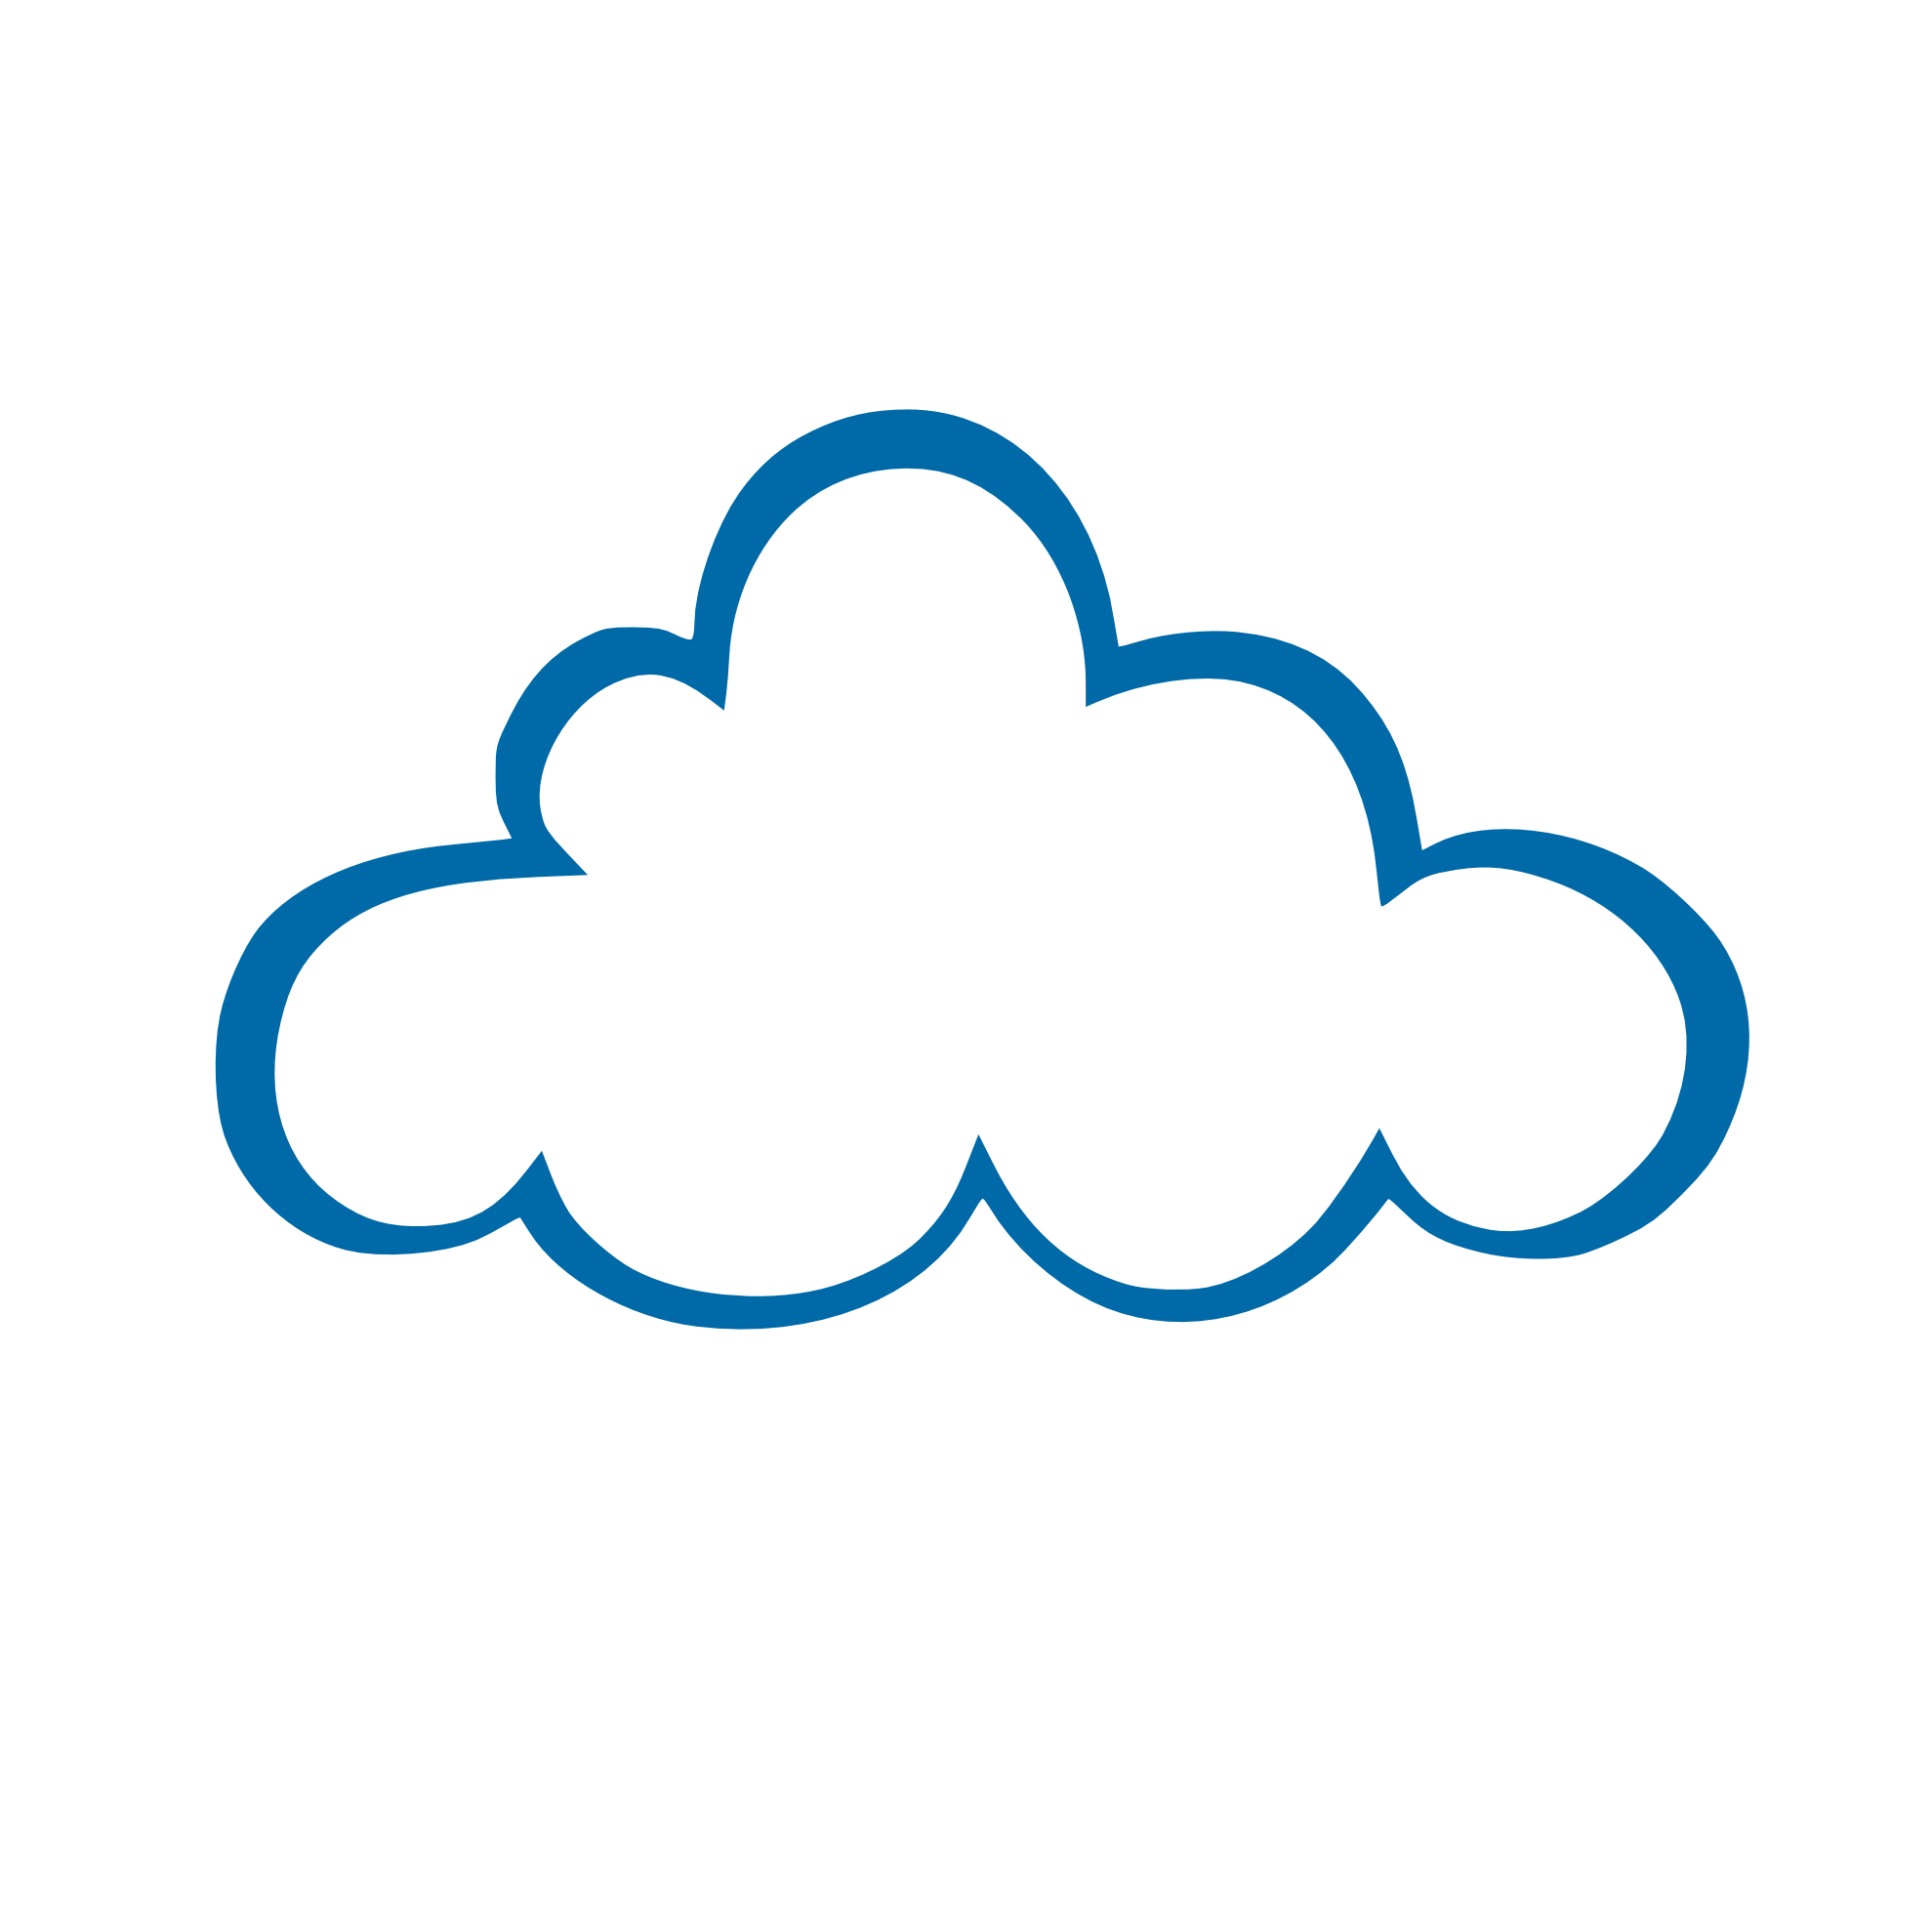 Cloud vector image sourced from https://www.freepnglogos.com/pics/cloud-clipart